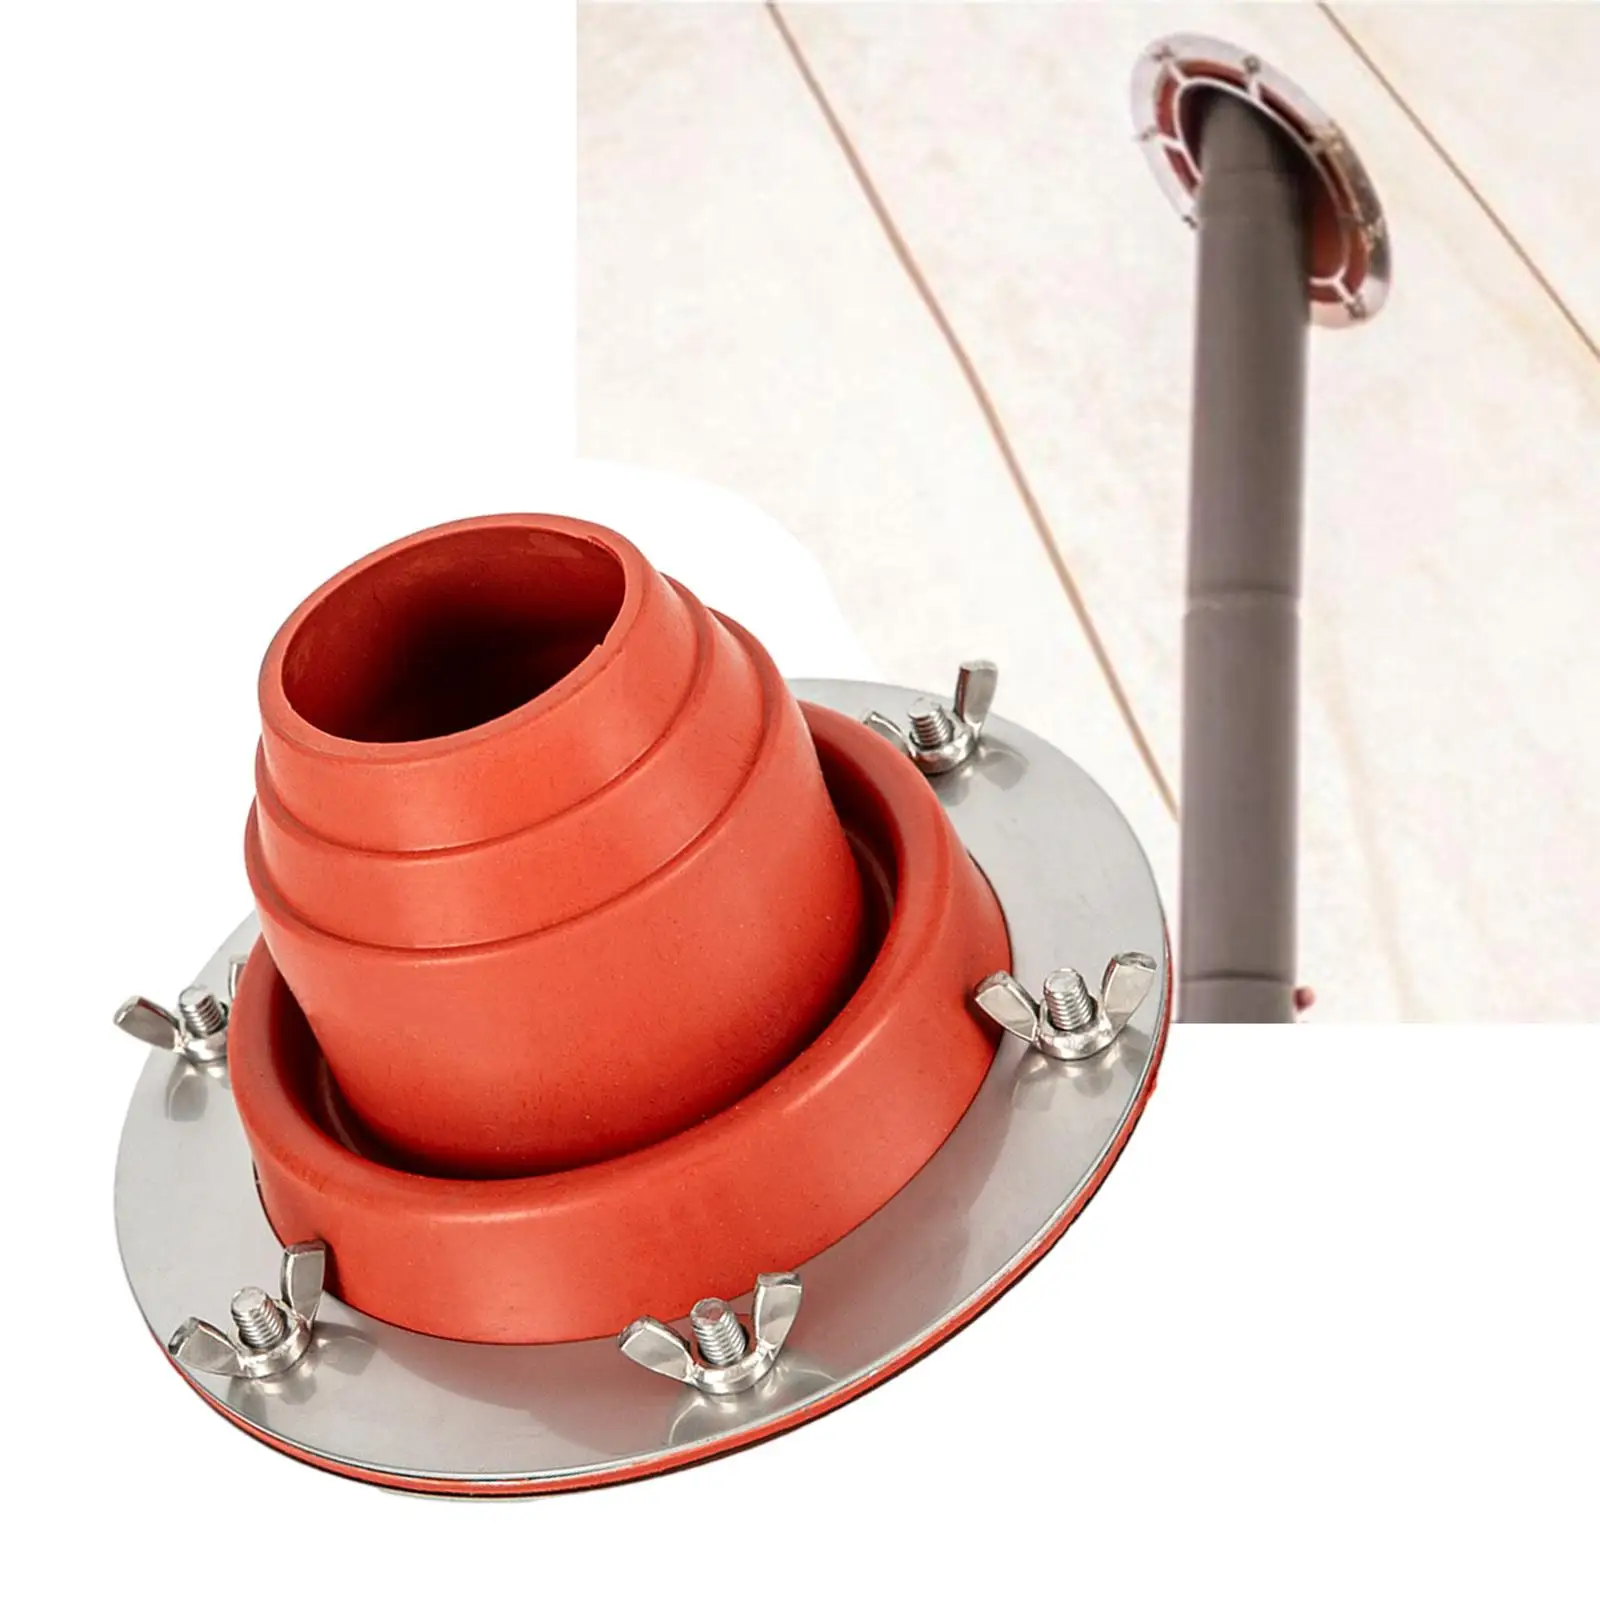 Stove Jack for Tent Tube Accessories Firewood Stove Fire Resistant Pipe Vent for Outdoor Tent Camping Backpacking Hot Stove